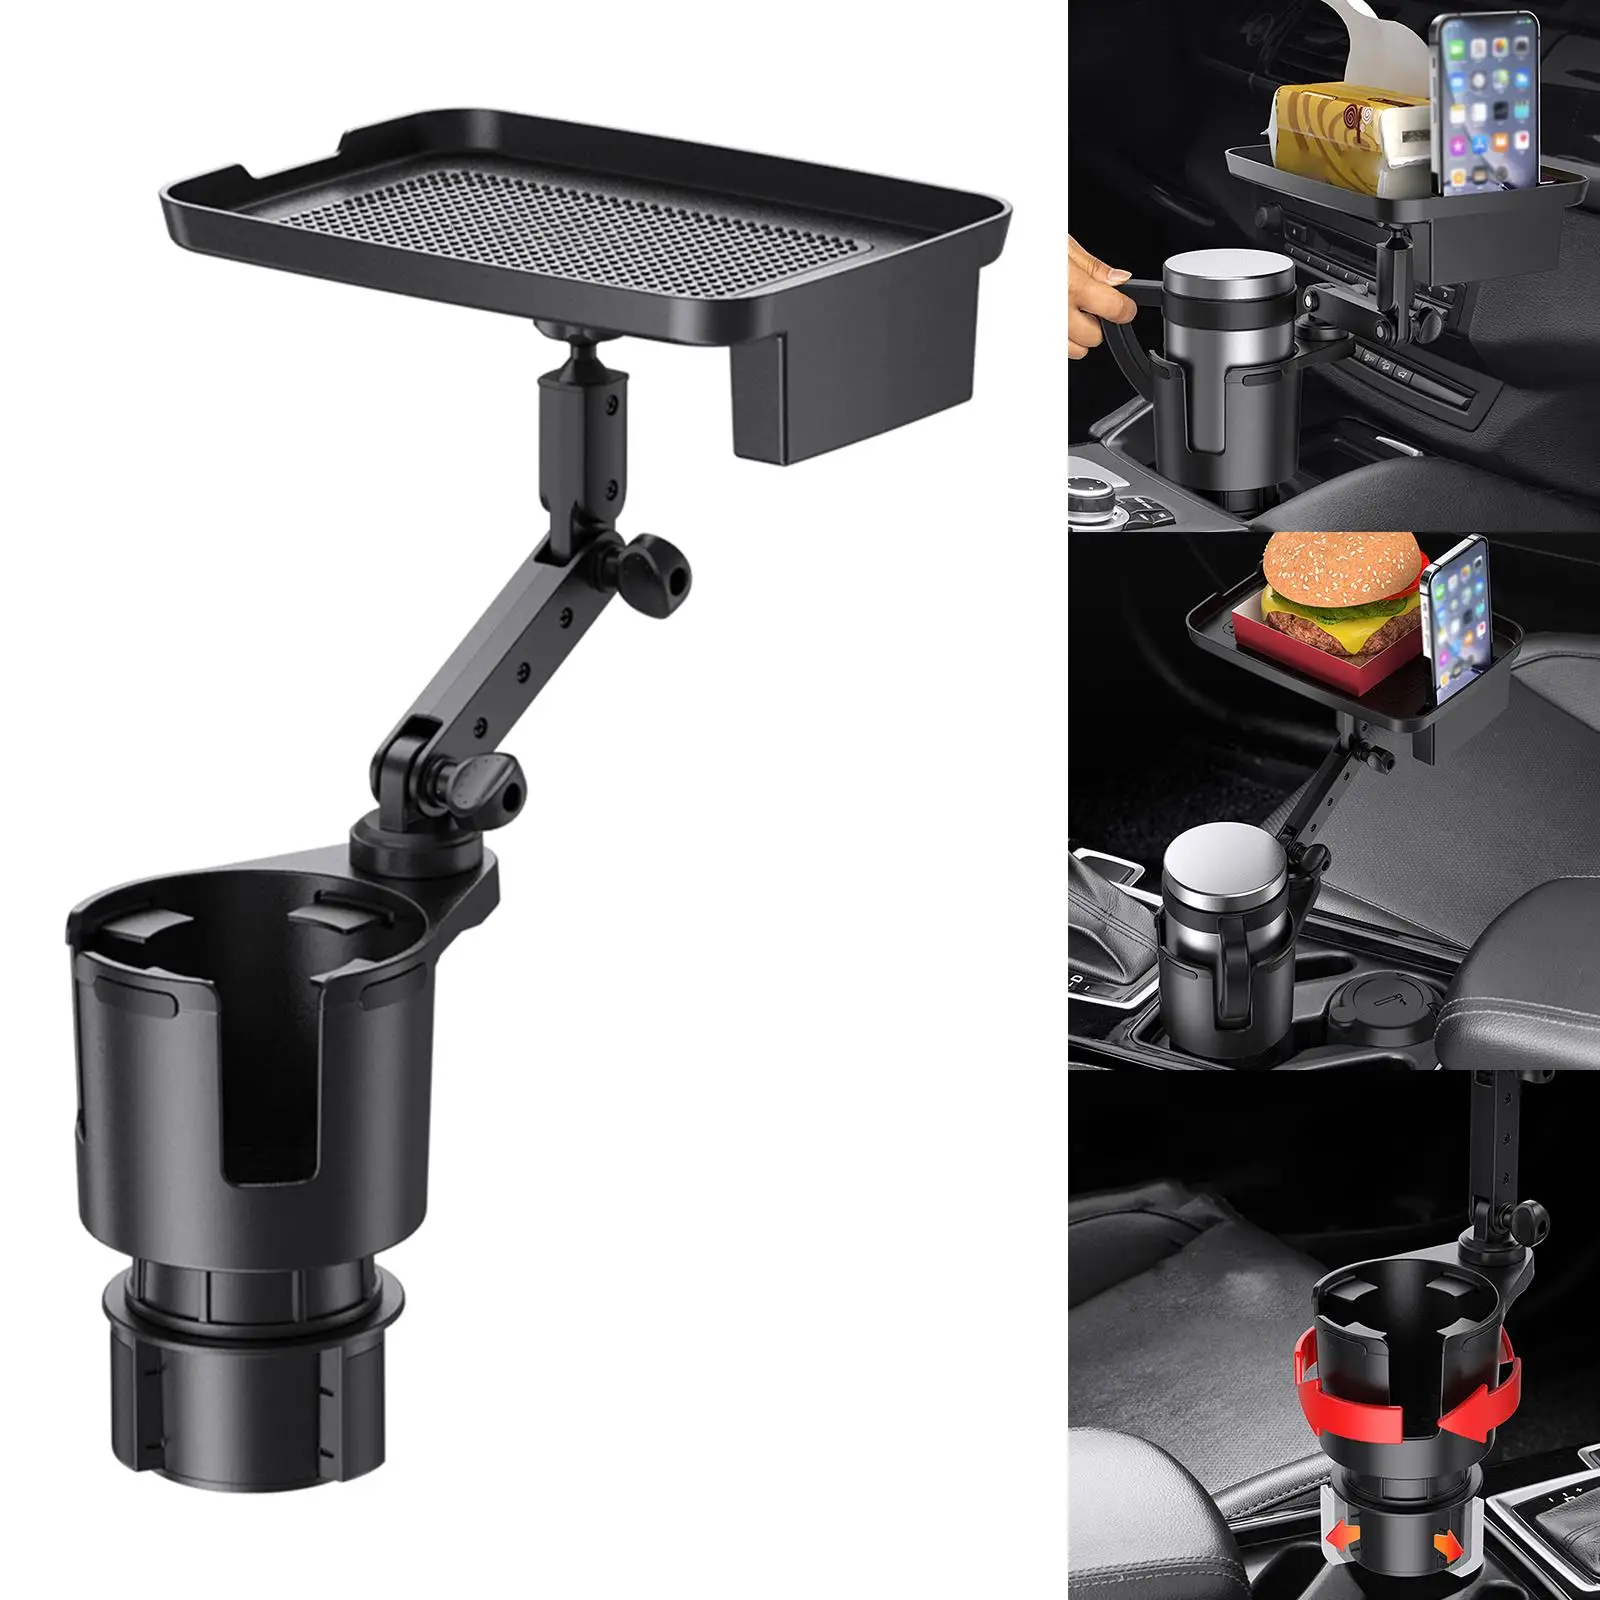 Multifunctional Car Cup Holder Storage Tray, Stable Portable Retractable Vehicle